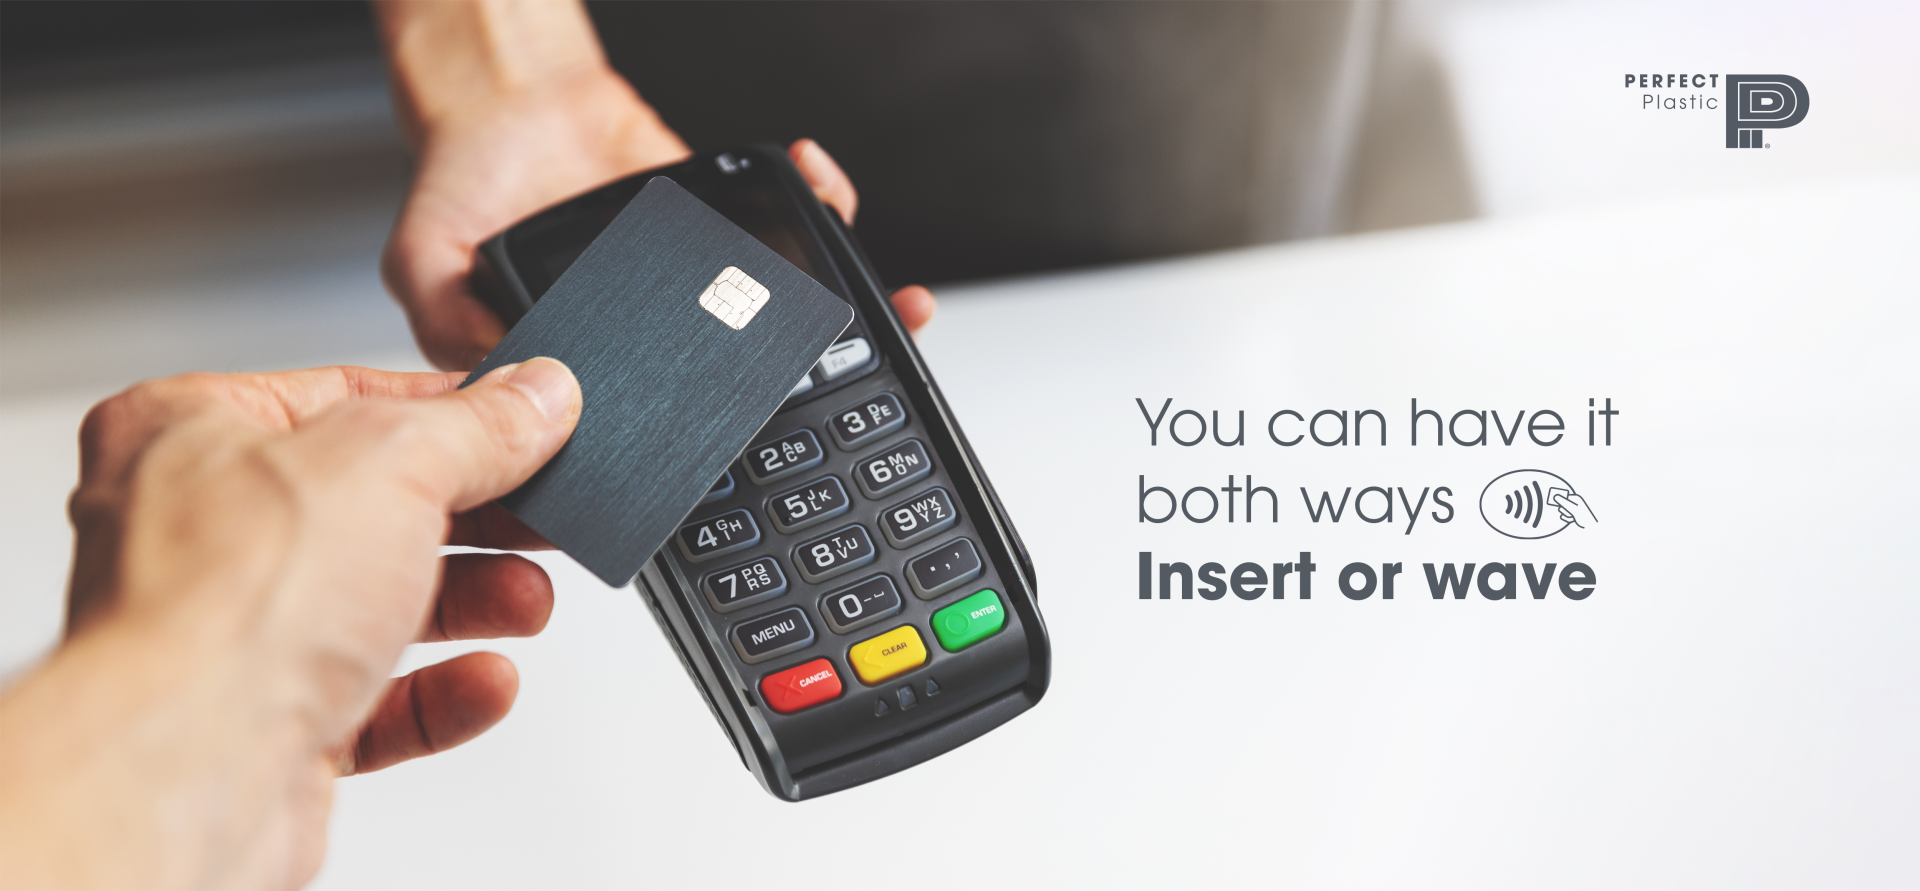 PPP harnesses Contactless EMV tech for secure, convenient transactions for consumers and businesses.